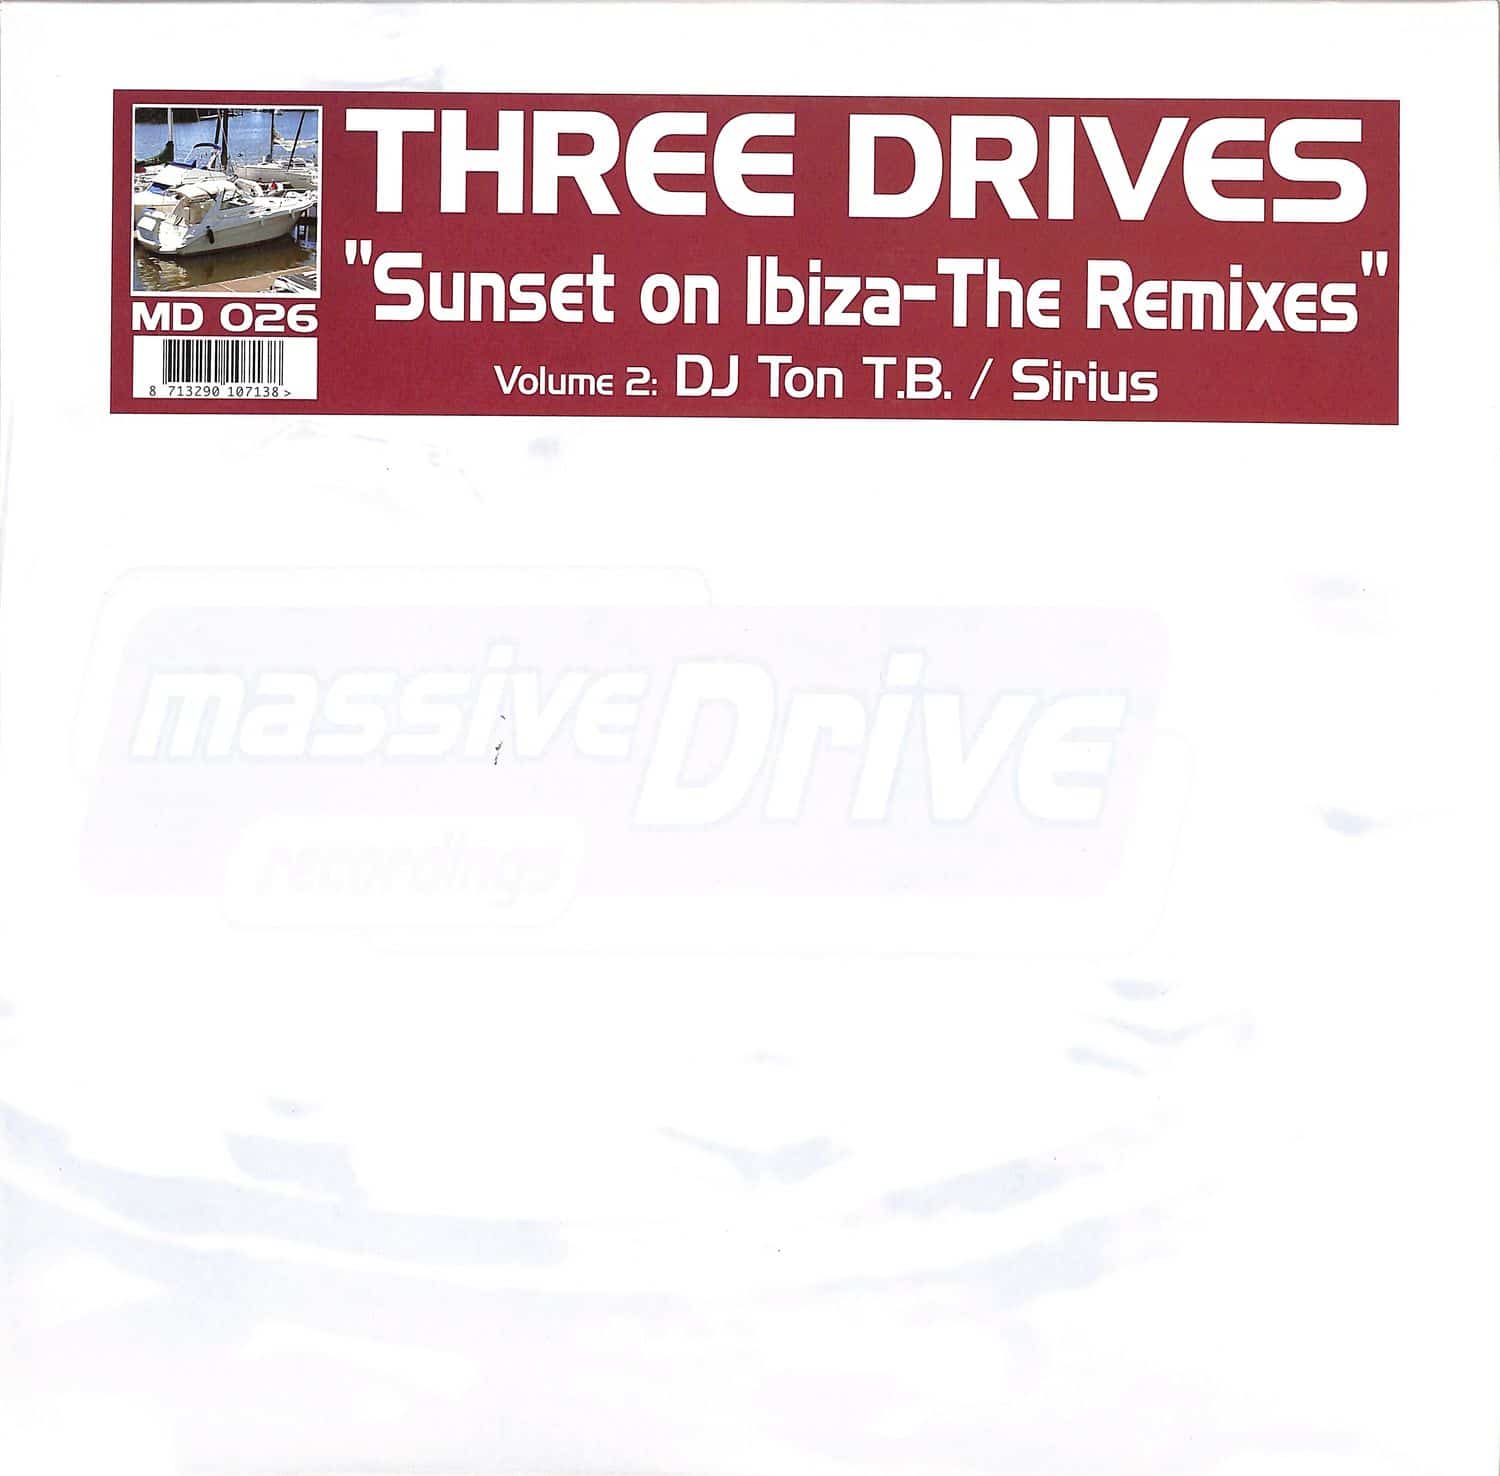 Three Drives - SUNSET IN IBIZA - THE REMIXES VOL. 2